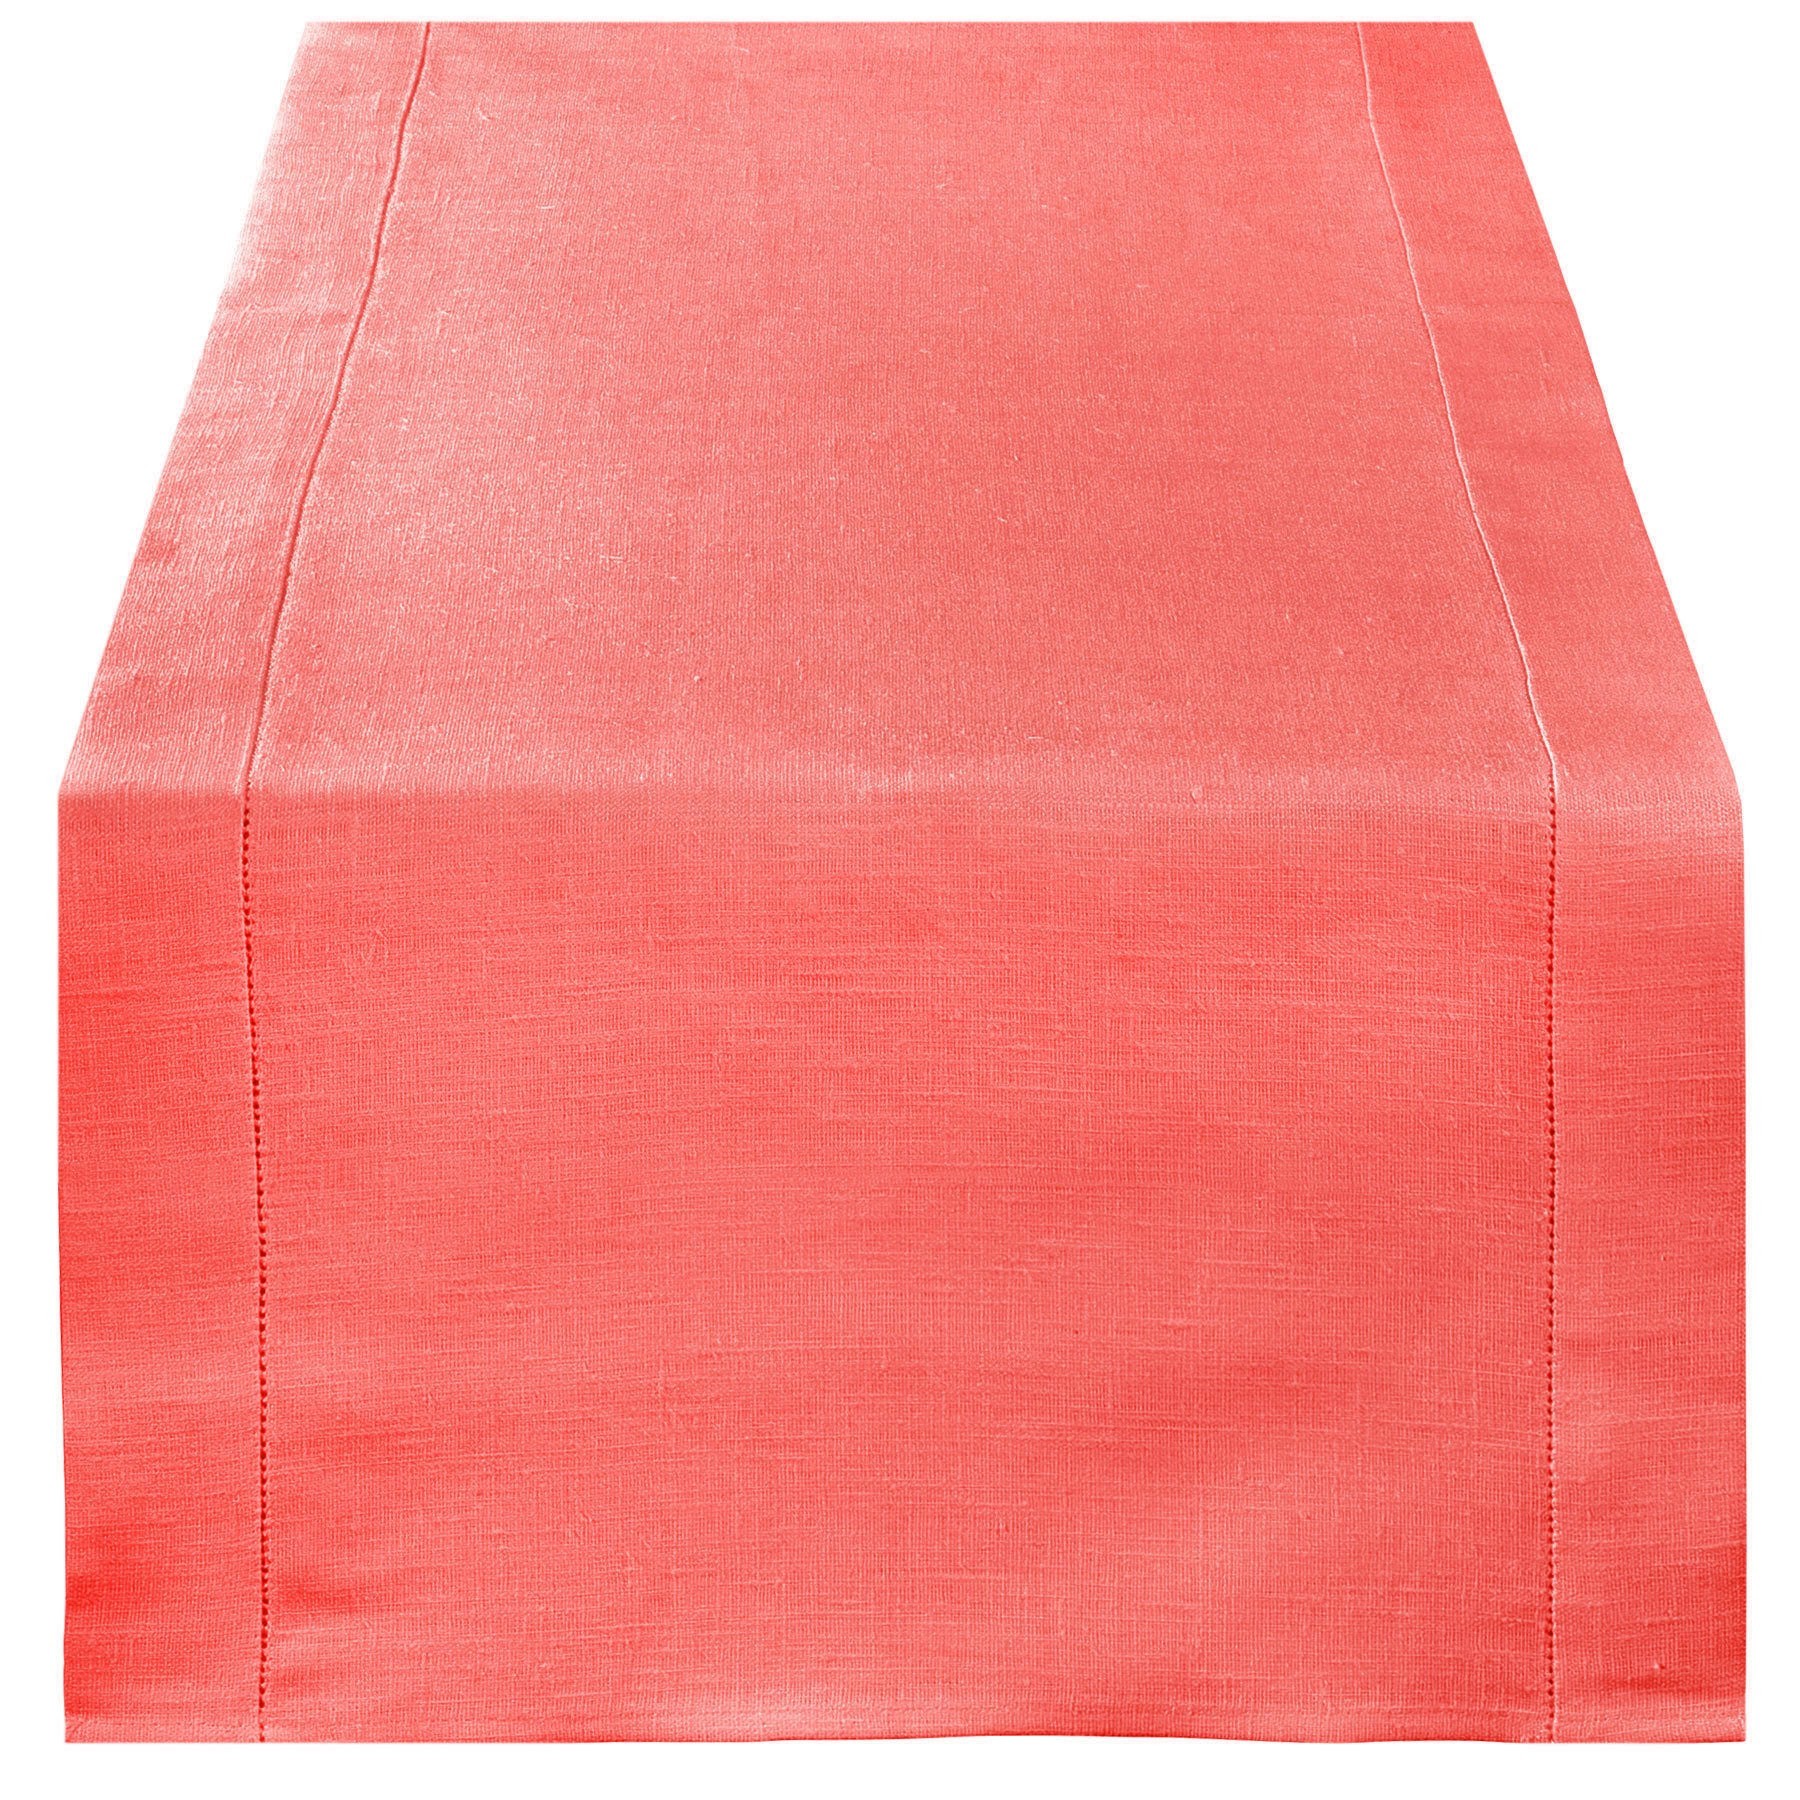 coral table runner